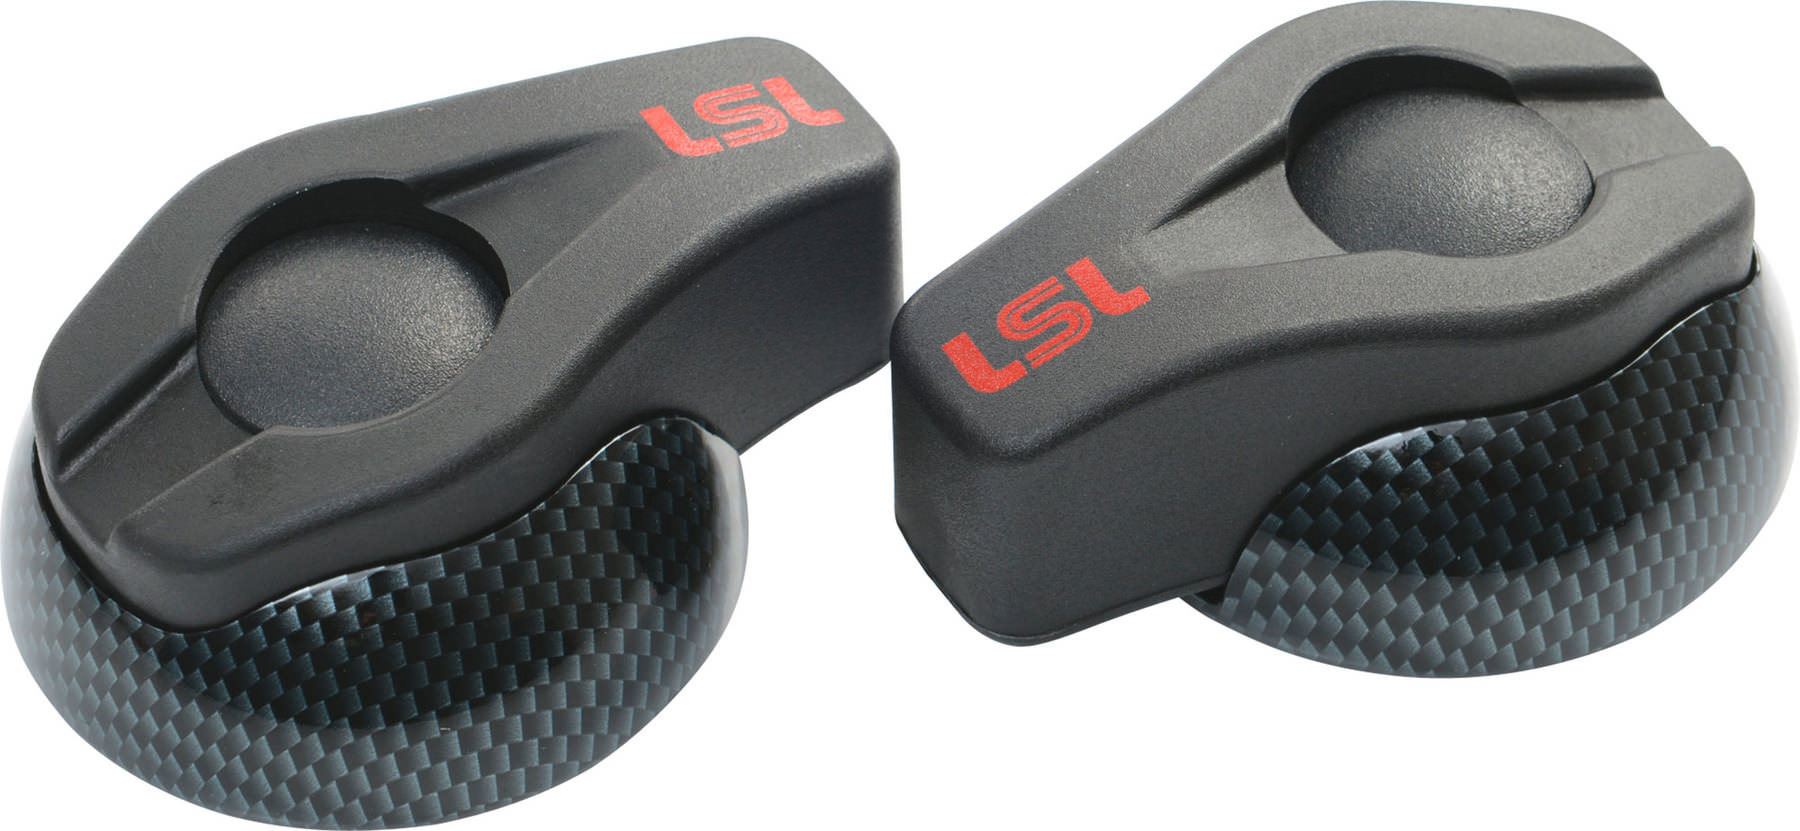 Buy LSL Crash-Pads Pair | Louis motorcycle clothing and technology